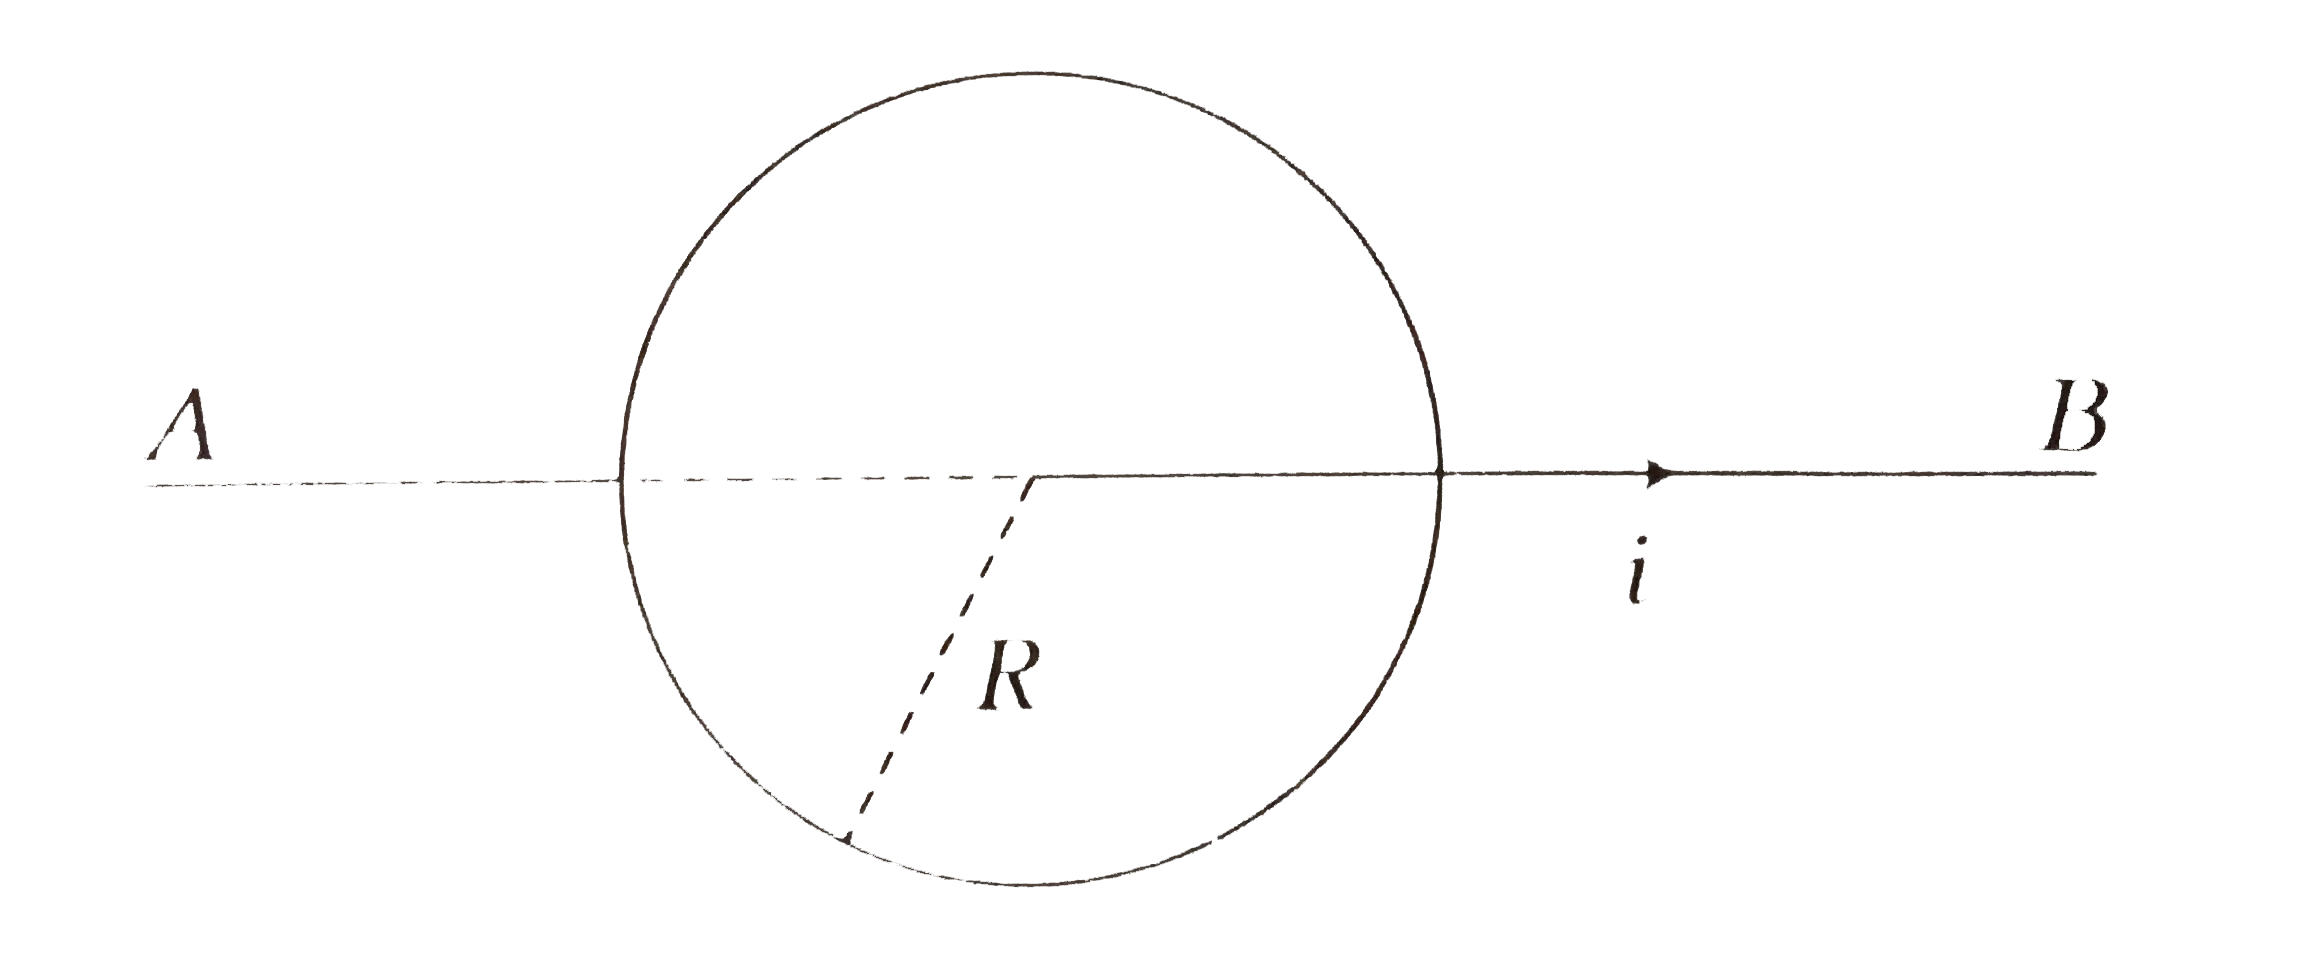 A infinitely long conductor AB lies along the axis of a circular loop of radius R. If the current in the conductor AB varies at the rate of x ampere/scond, then the induced emf in the loop is